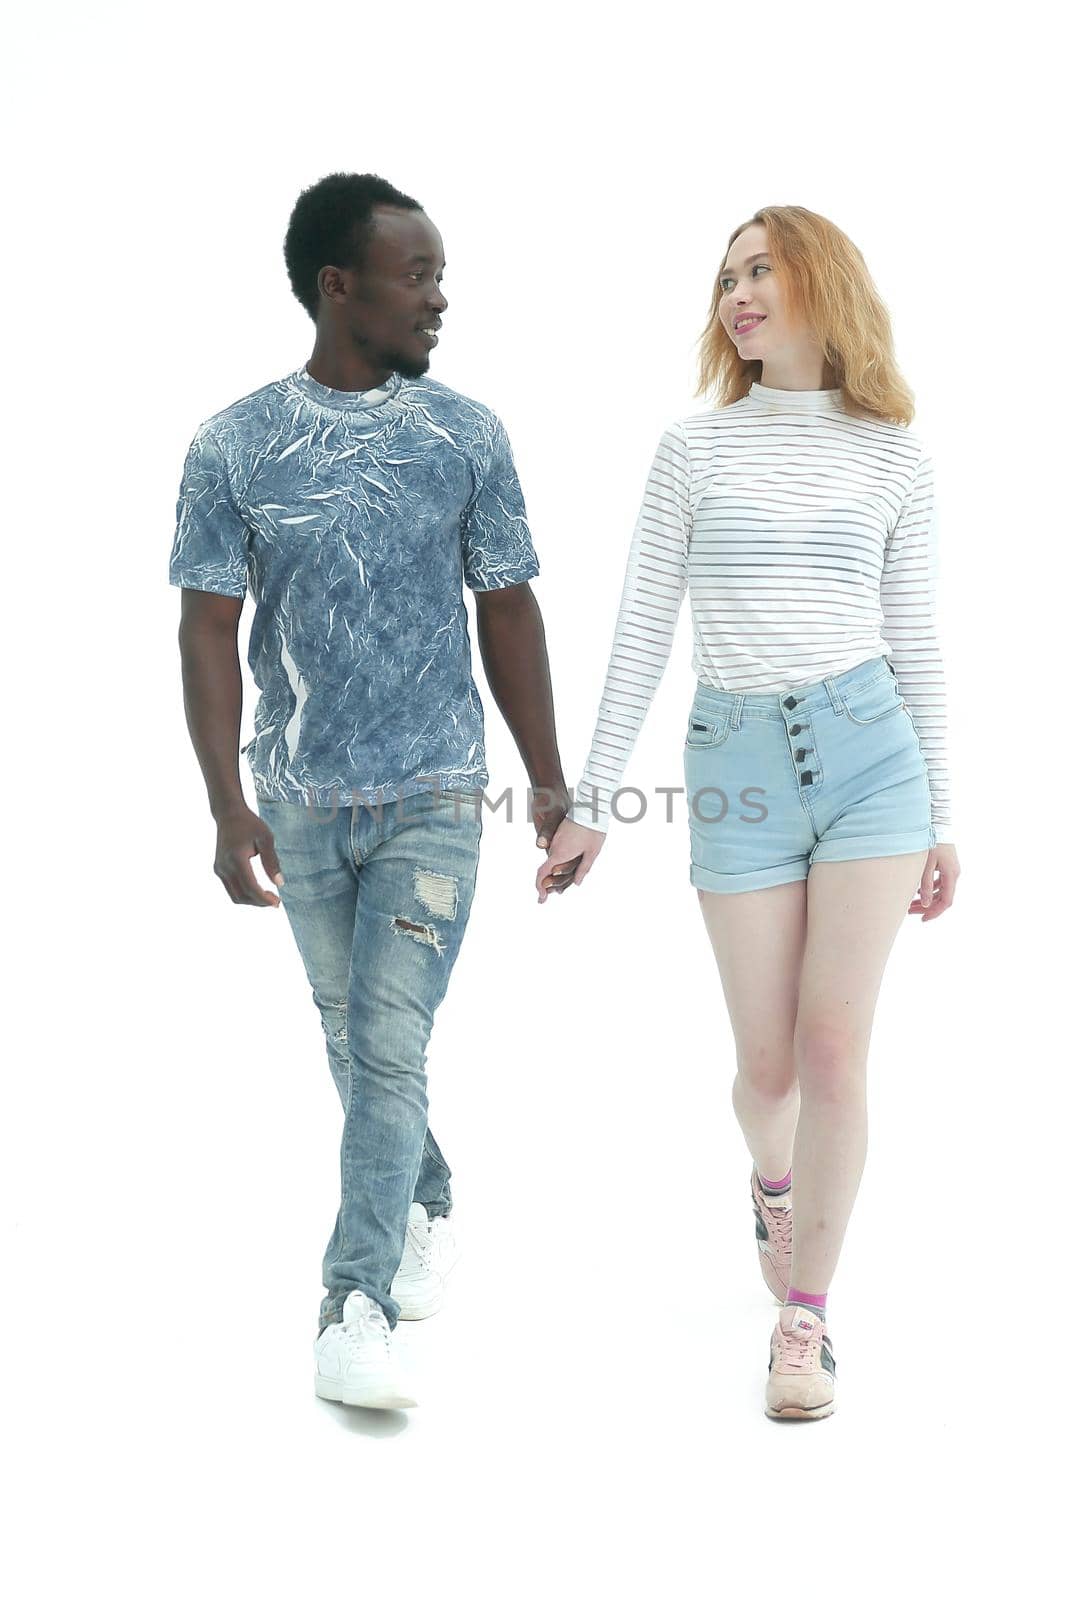 in full growth. casual guy and girl stepping forward. isolated on white